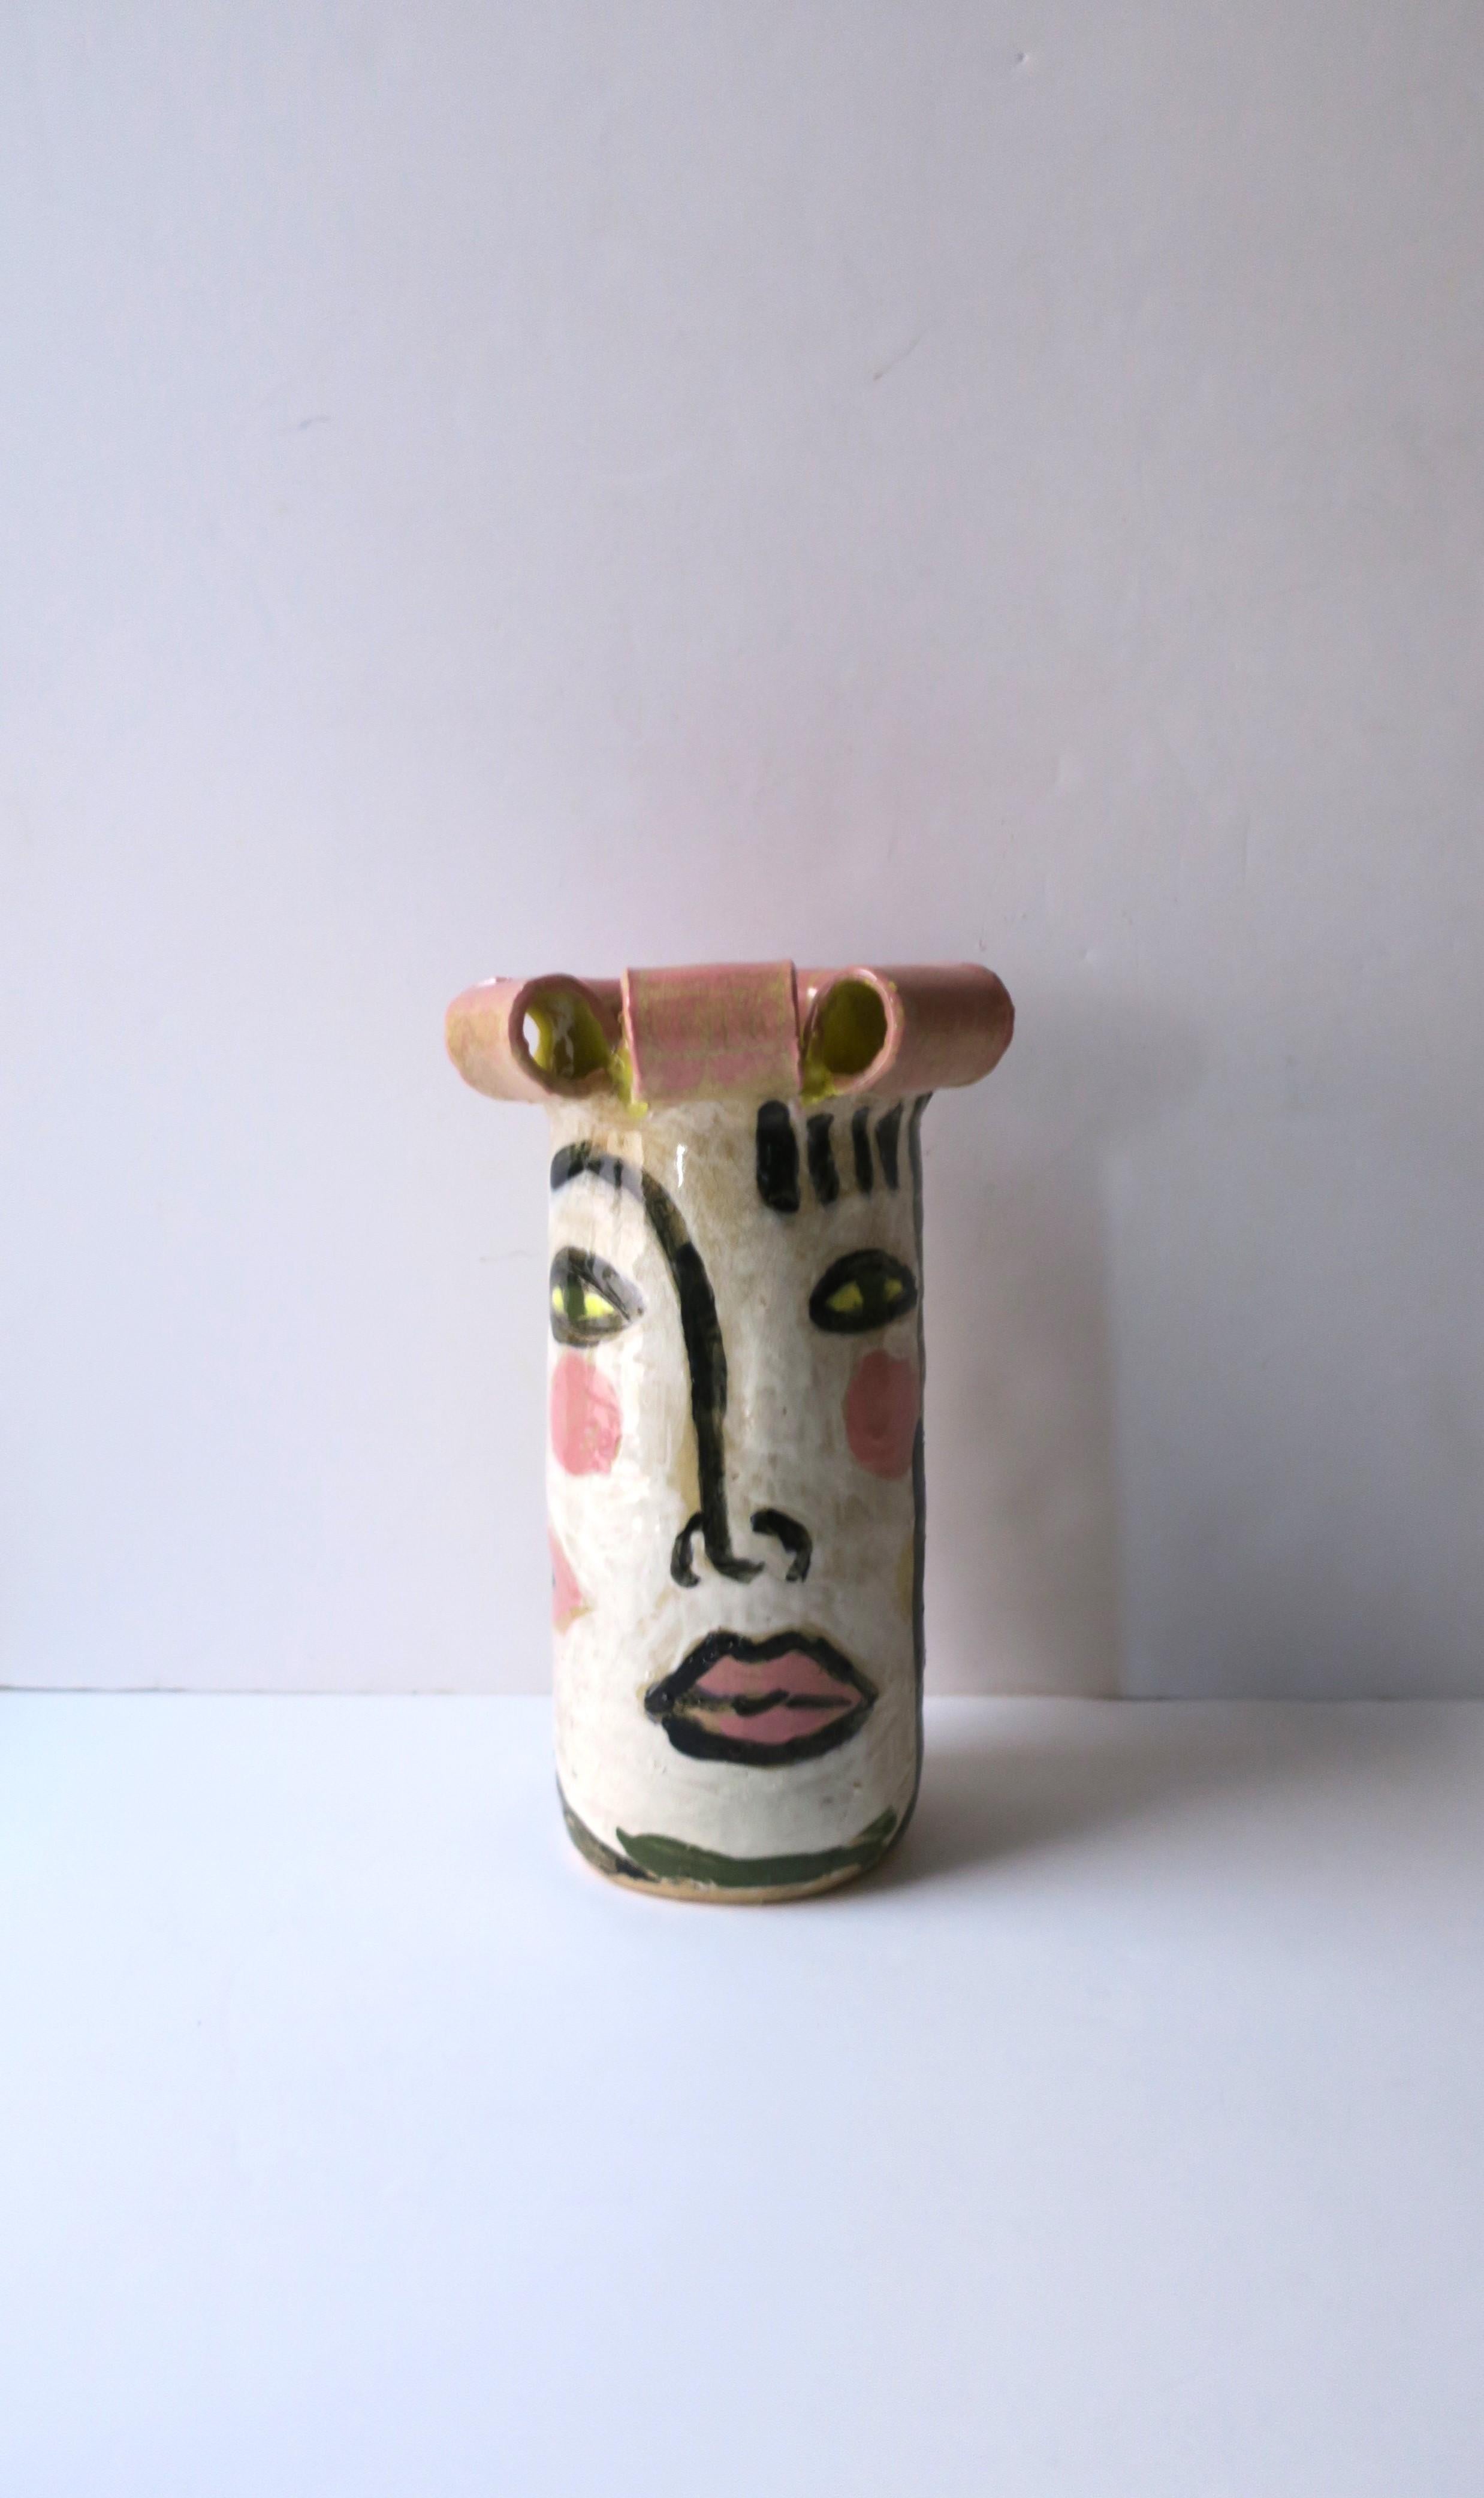 Cubist Face Studio Pottery Sculpture Vase in the Style of Picasso, 1989 For Sale 4